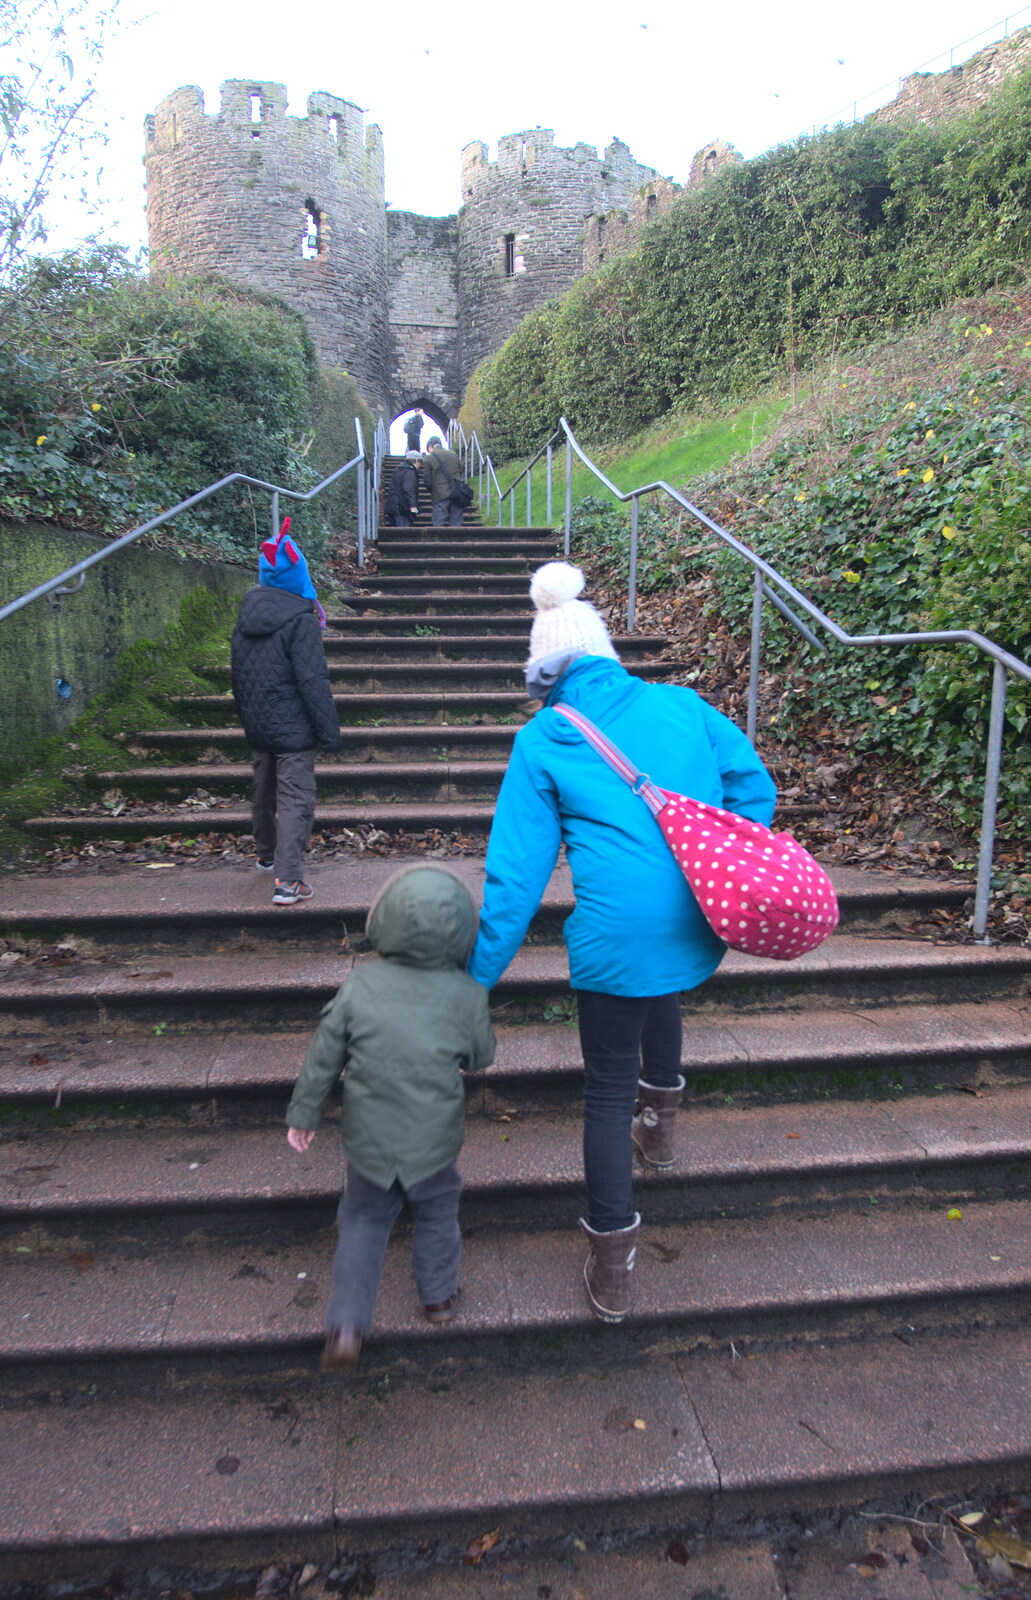 Climbing the steps to the castle and town from Conwy, Holyhead and the Ferry to Ireland - 21st December 2015